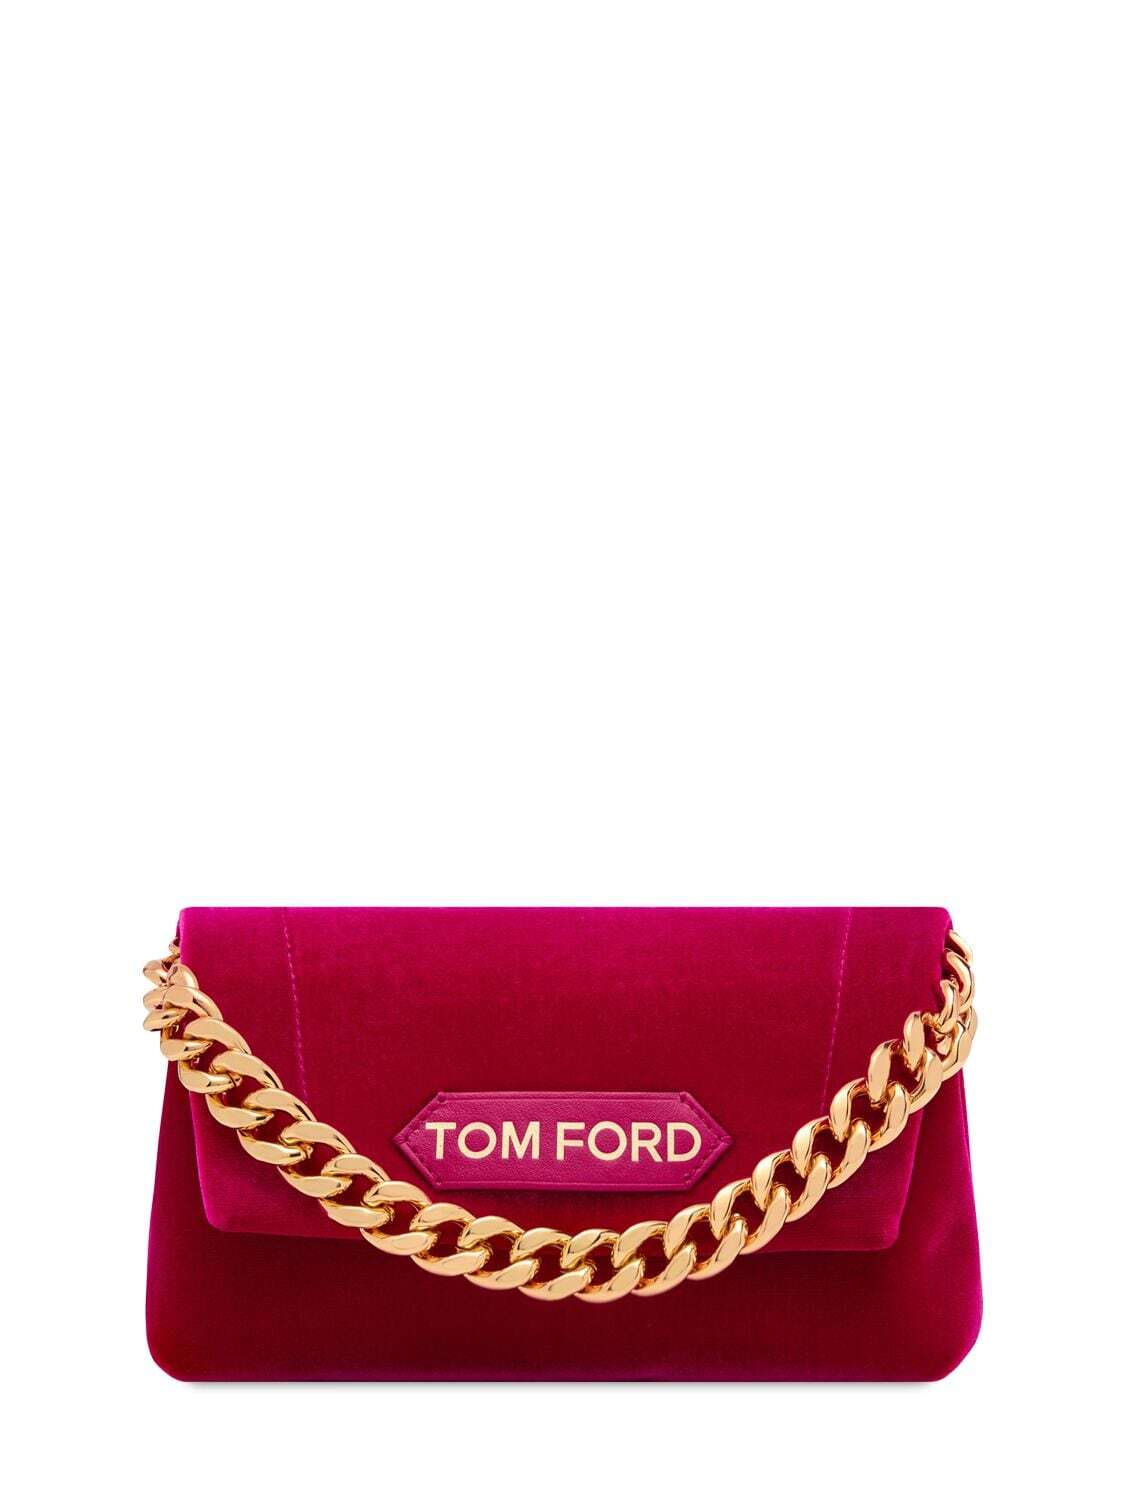 TOM FORD Mini Evening Canvas & Leather Bag in pink